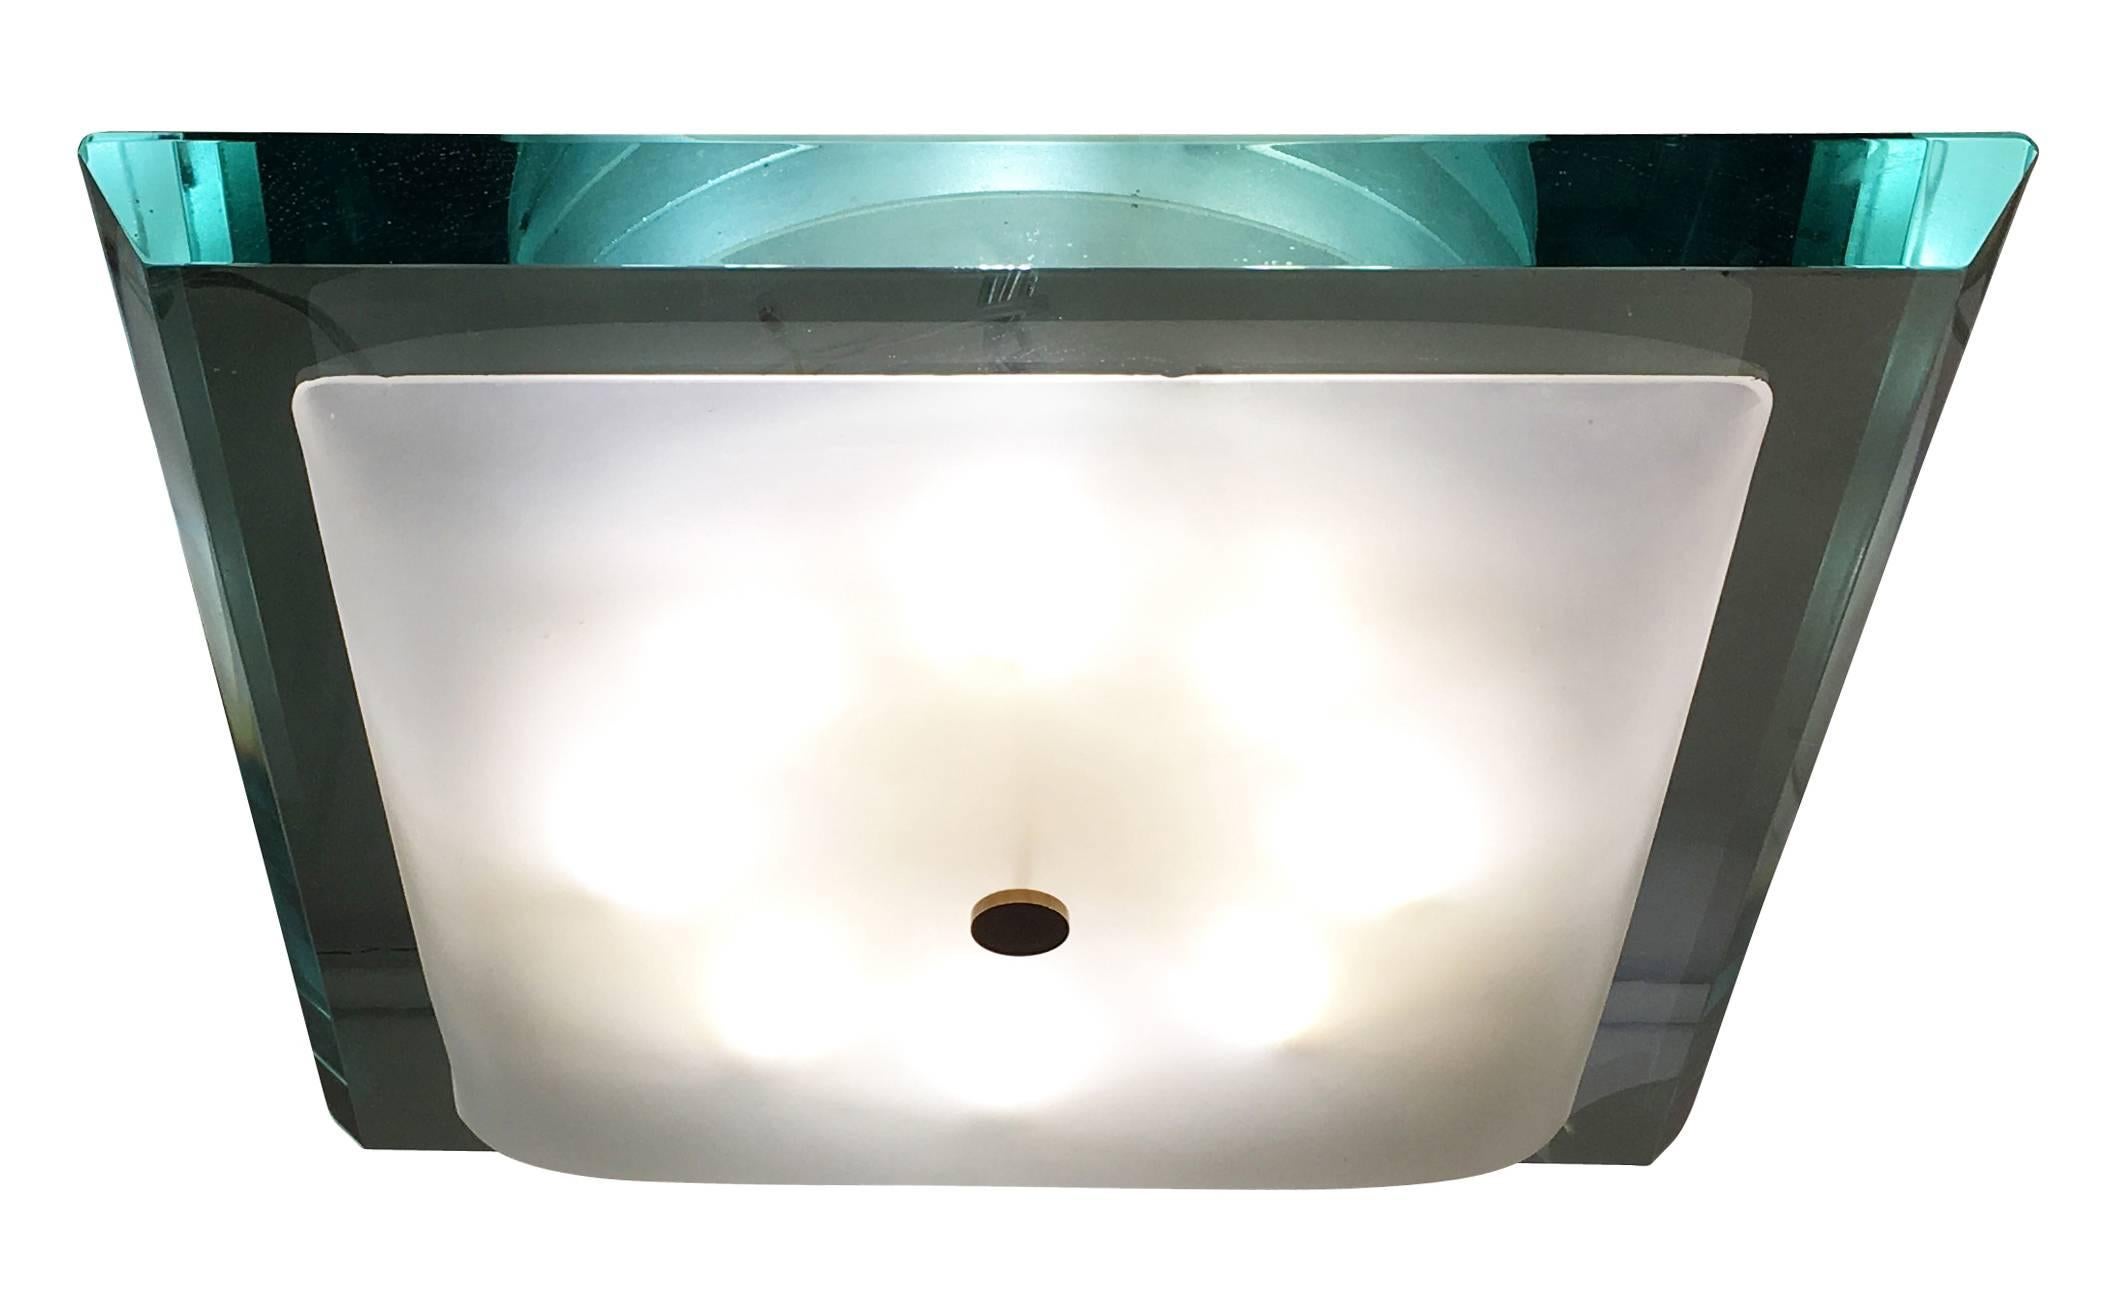 Stunning large Fontana Arte flush mount designed by Max Ingrand in the 1960s featuring a thick square glass. As typical of glass of the era it has a green edge which creates a beautiful emerald color when lit or seen from certain angles. The eight